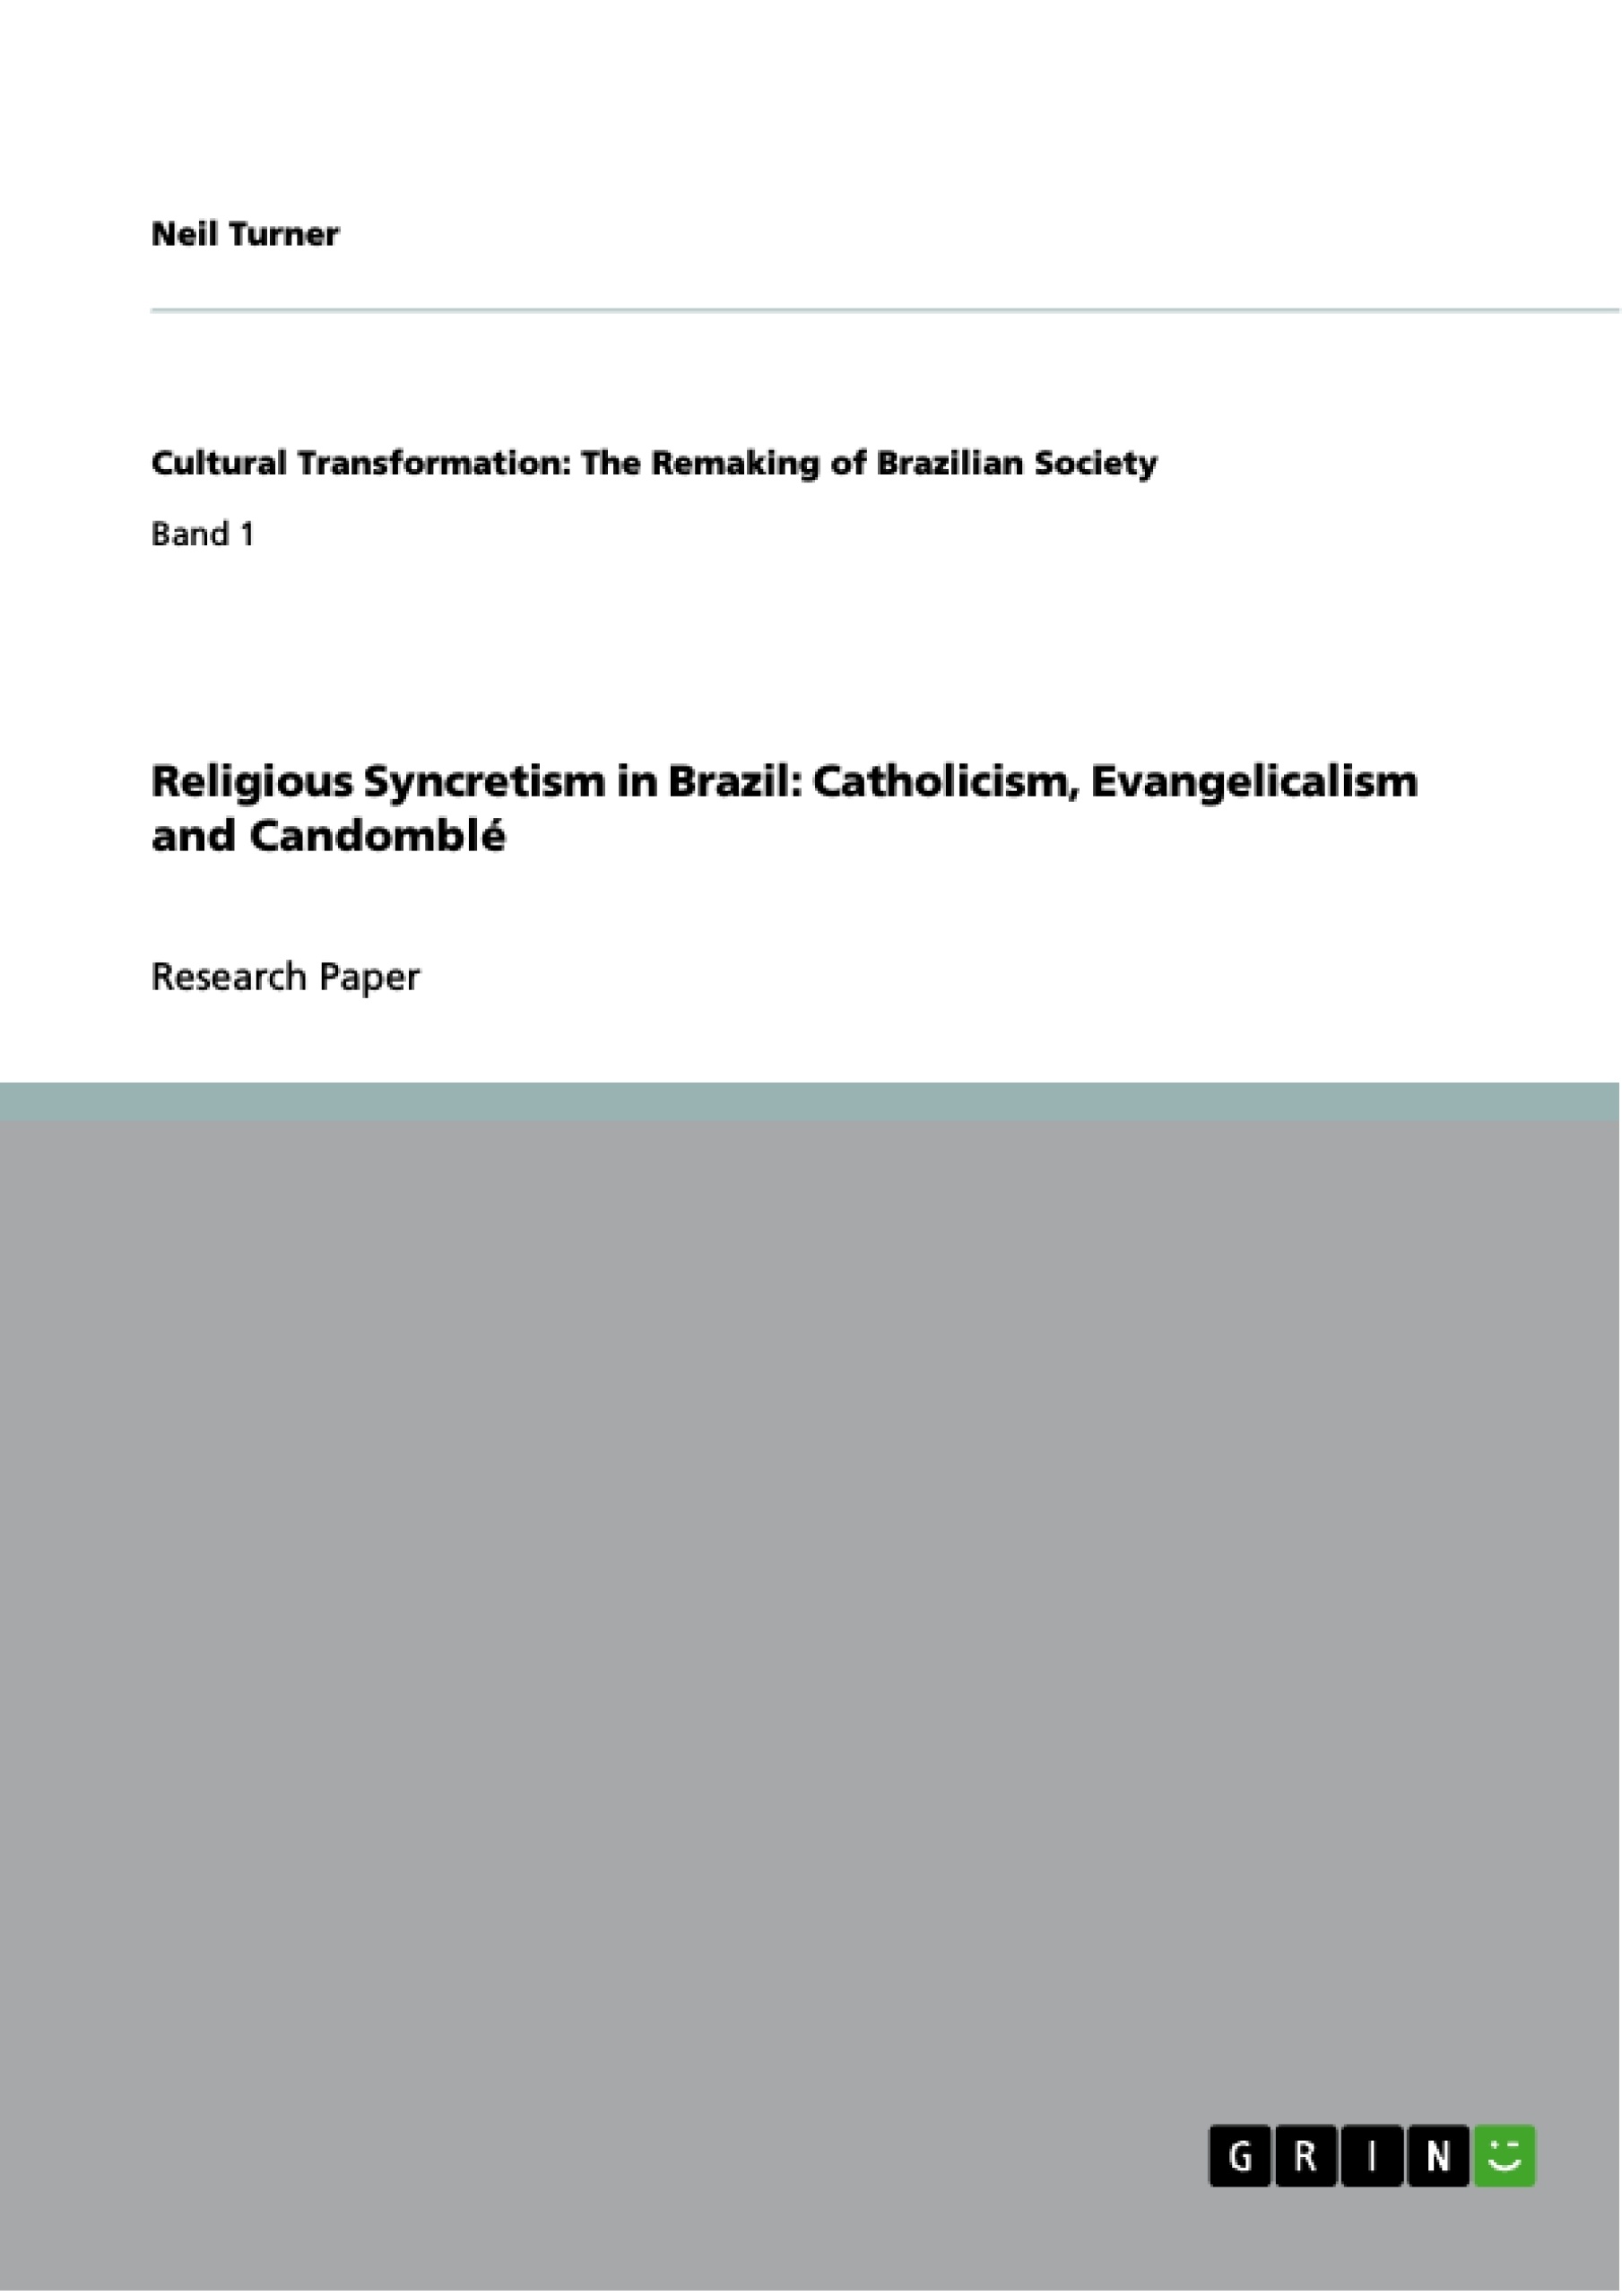 Titre: Religious Syncretism in Brazil: Catholicism, Evangelicalism and Candomblé